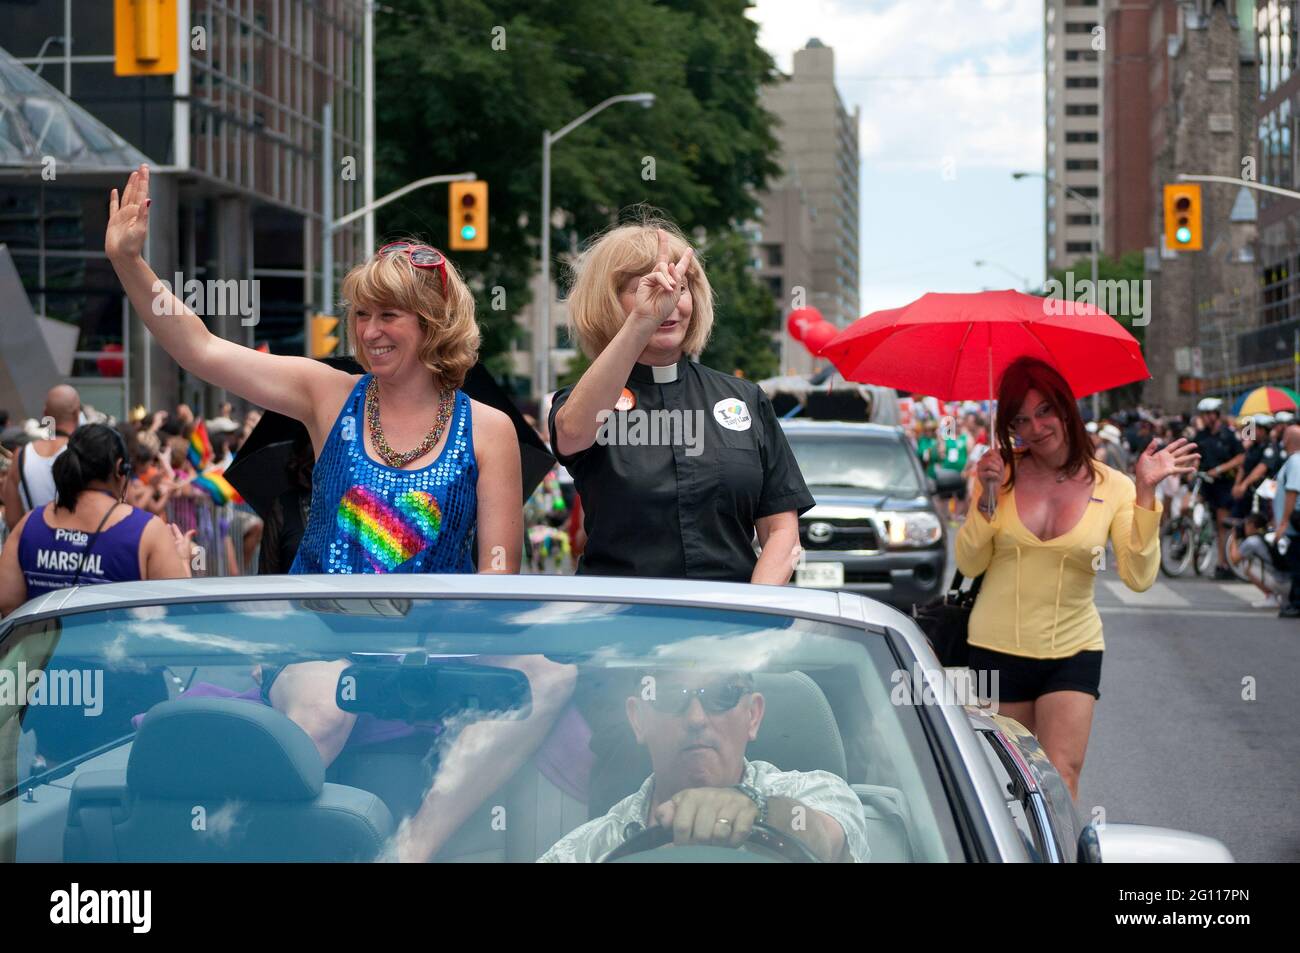 Cheri diNovo NDP MPP (wearing black)  and Laurel Broten ( wearing blue and rainbow) Pride Marshalls in Toronto Pride: Women riding in the car cabriole Stock Photo